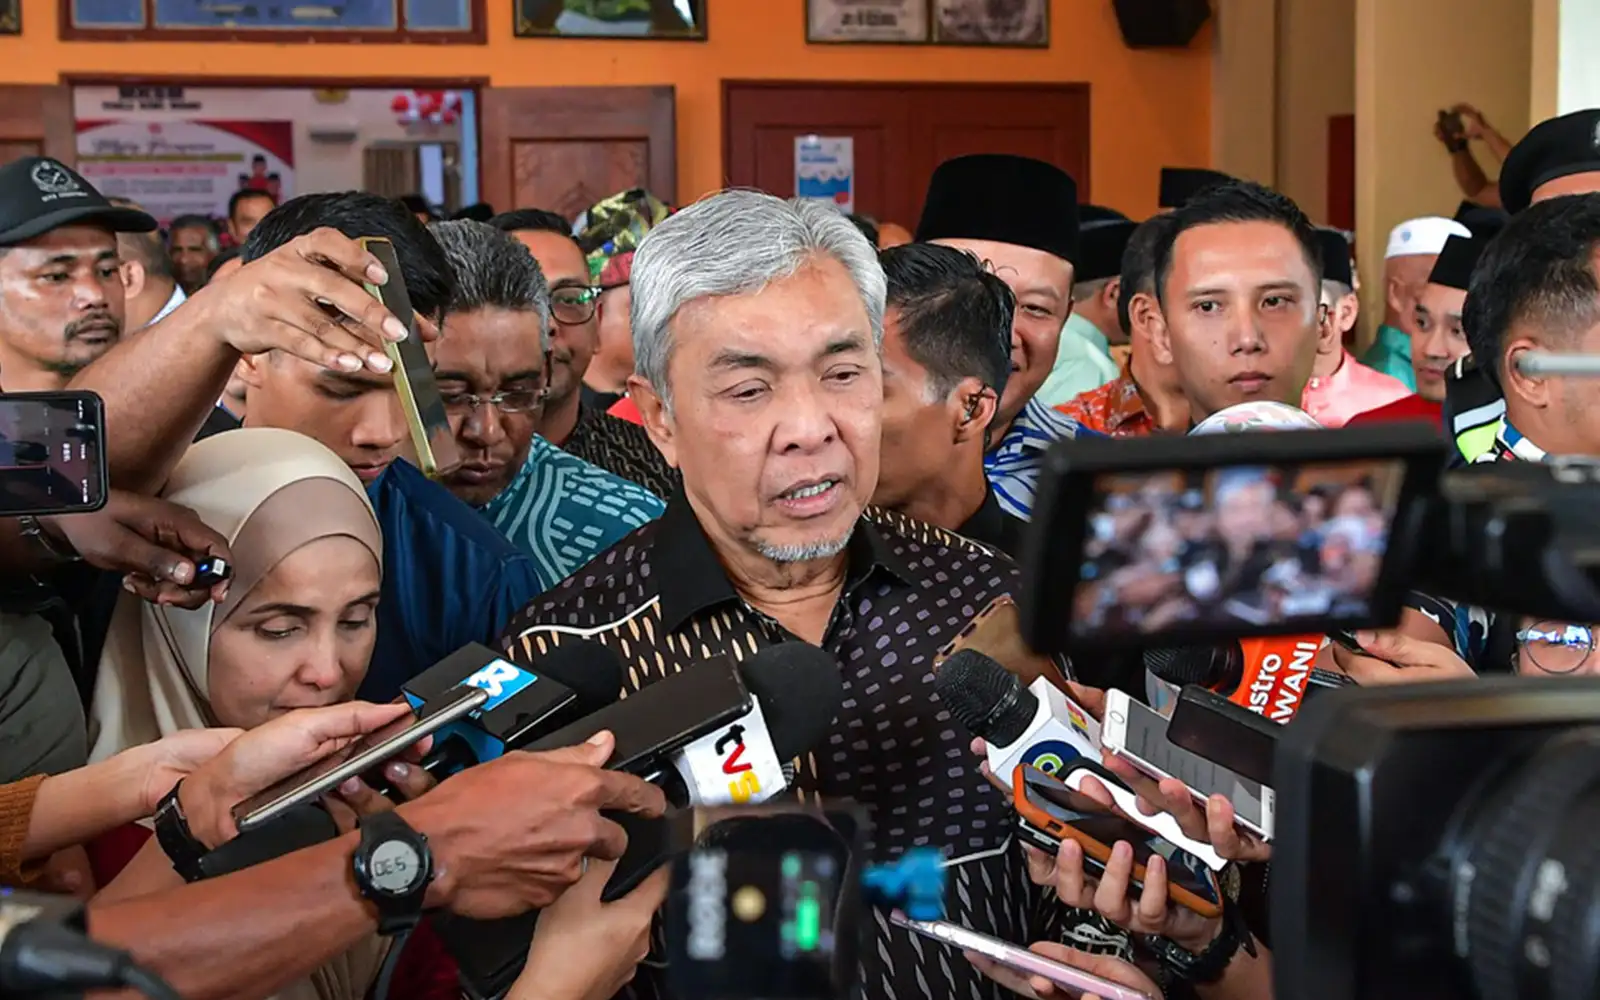 accept that we’re no longer dominant and adapt, zahid tells umno